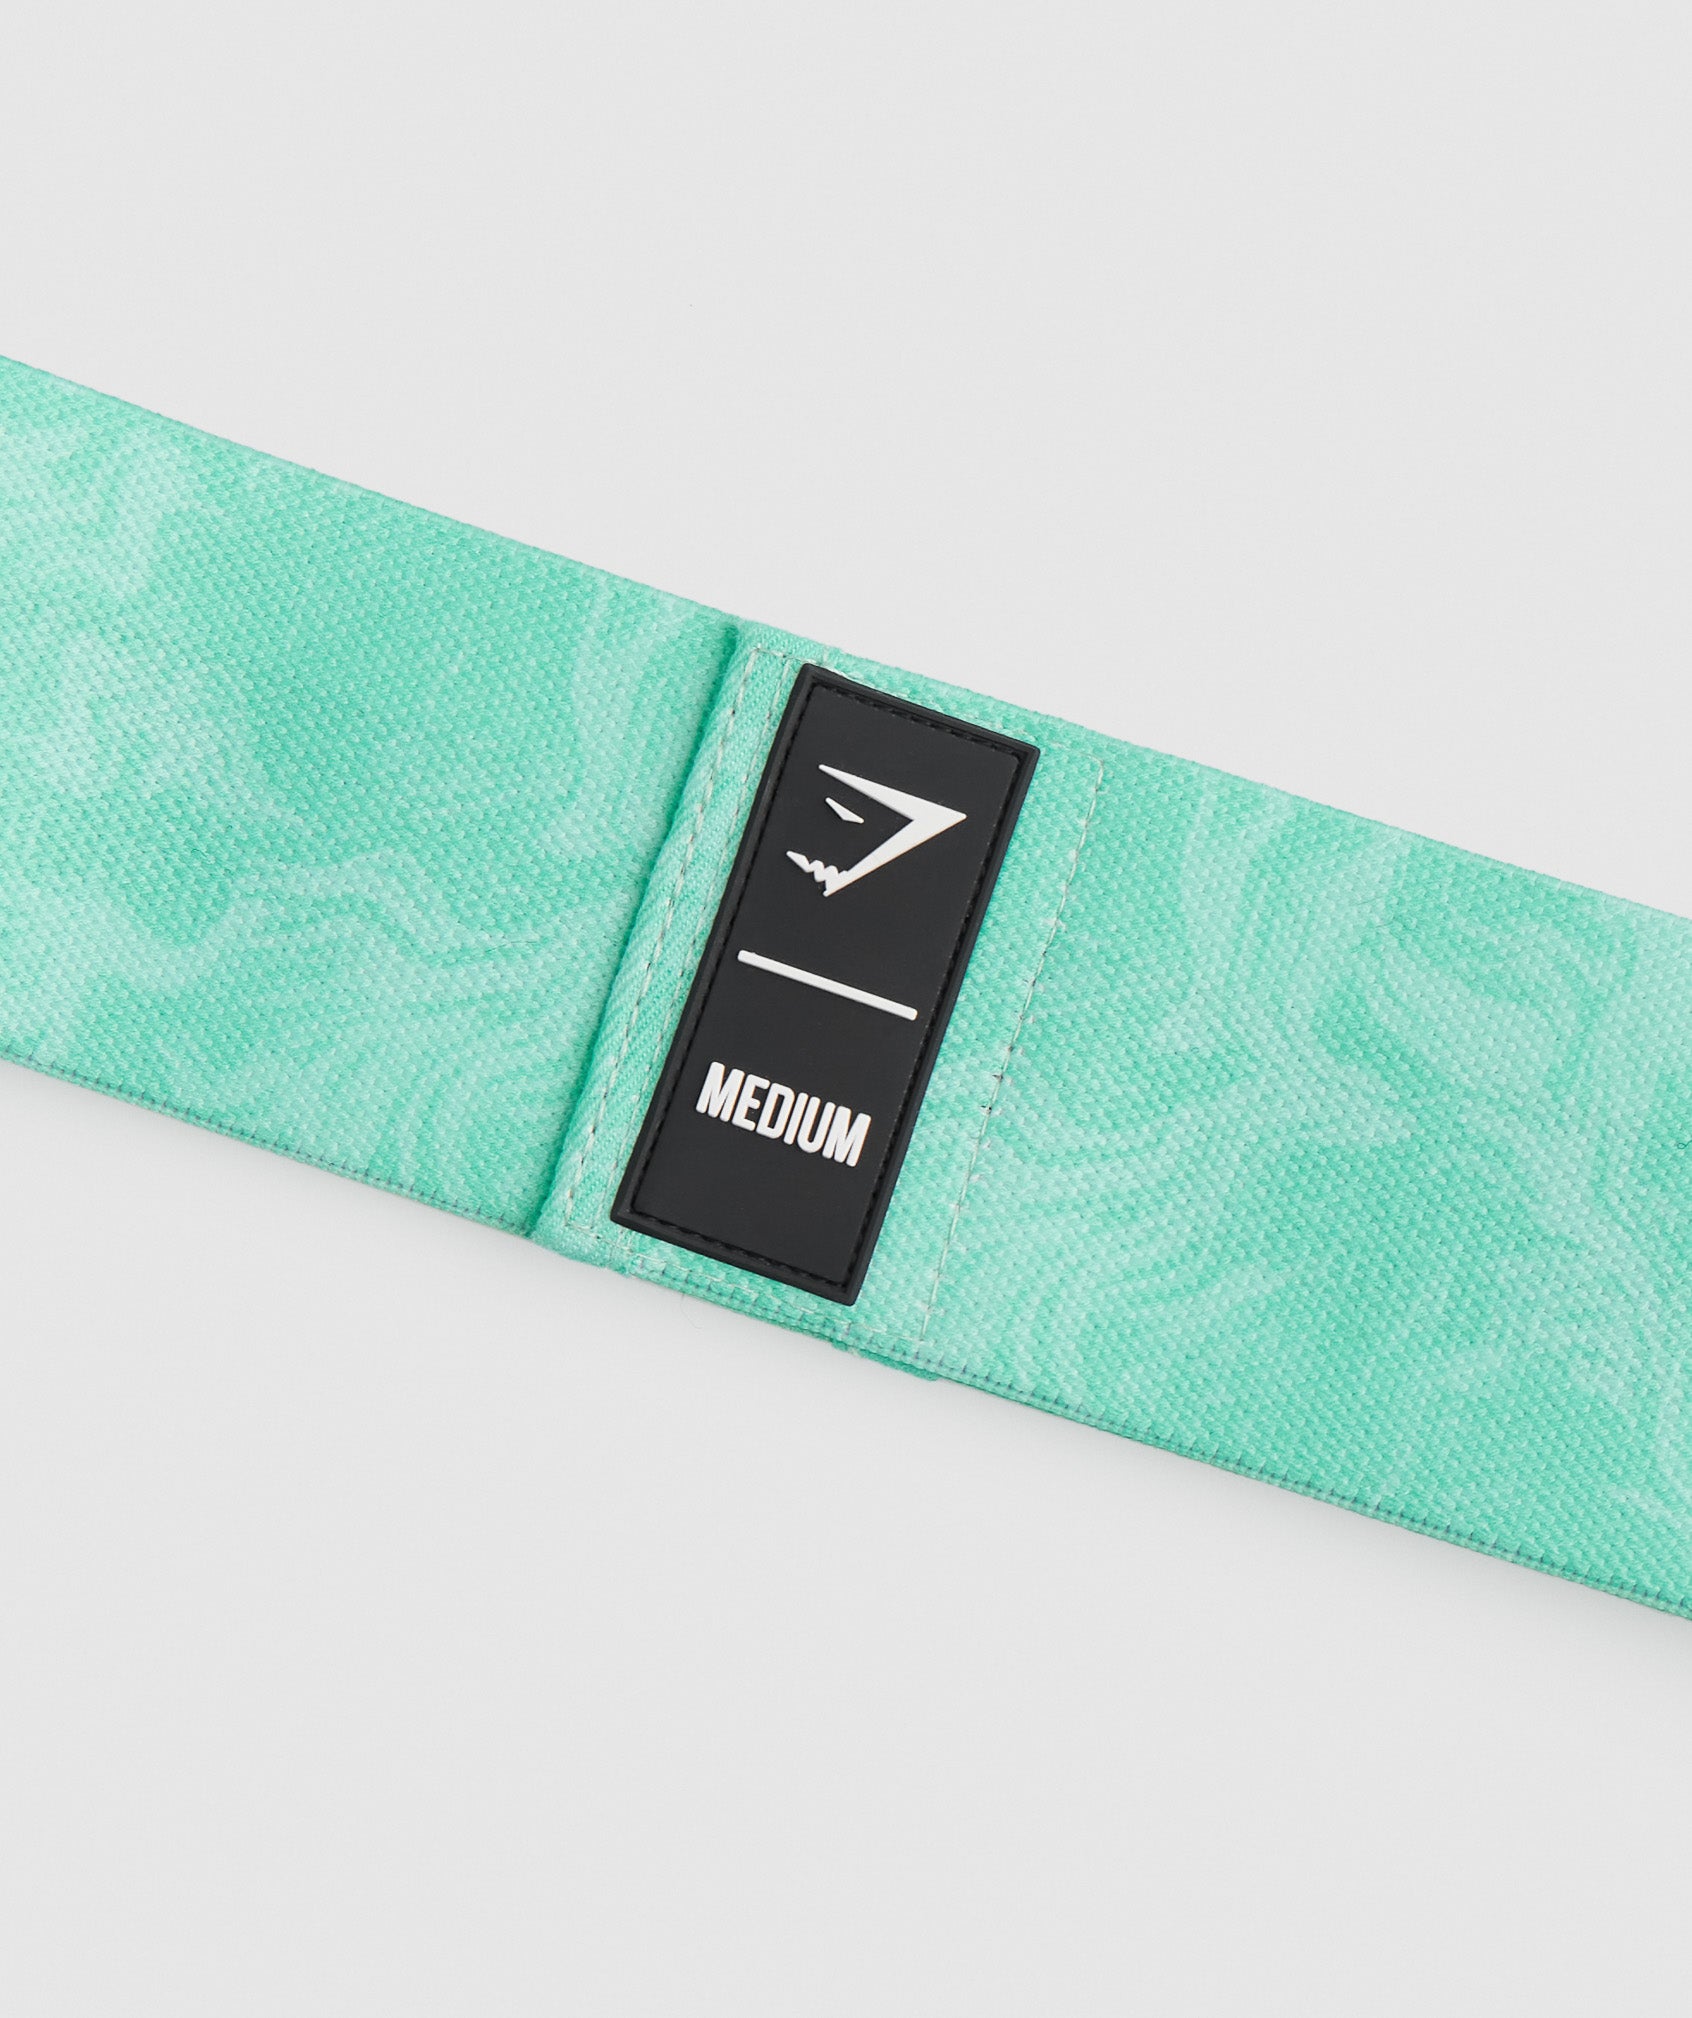 Medium Glute Band in Bright Turquoise Print - view 3